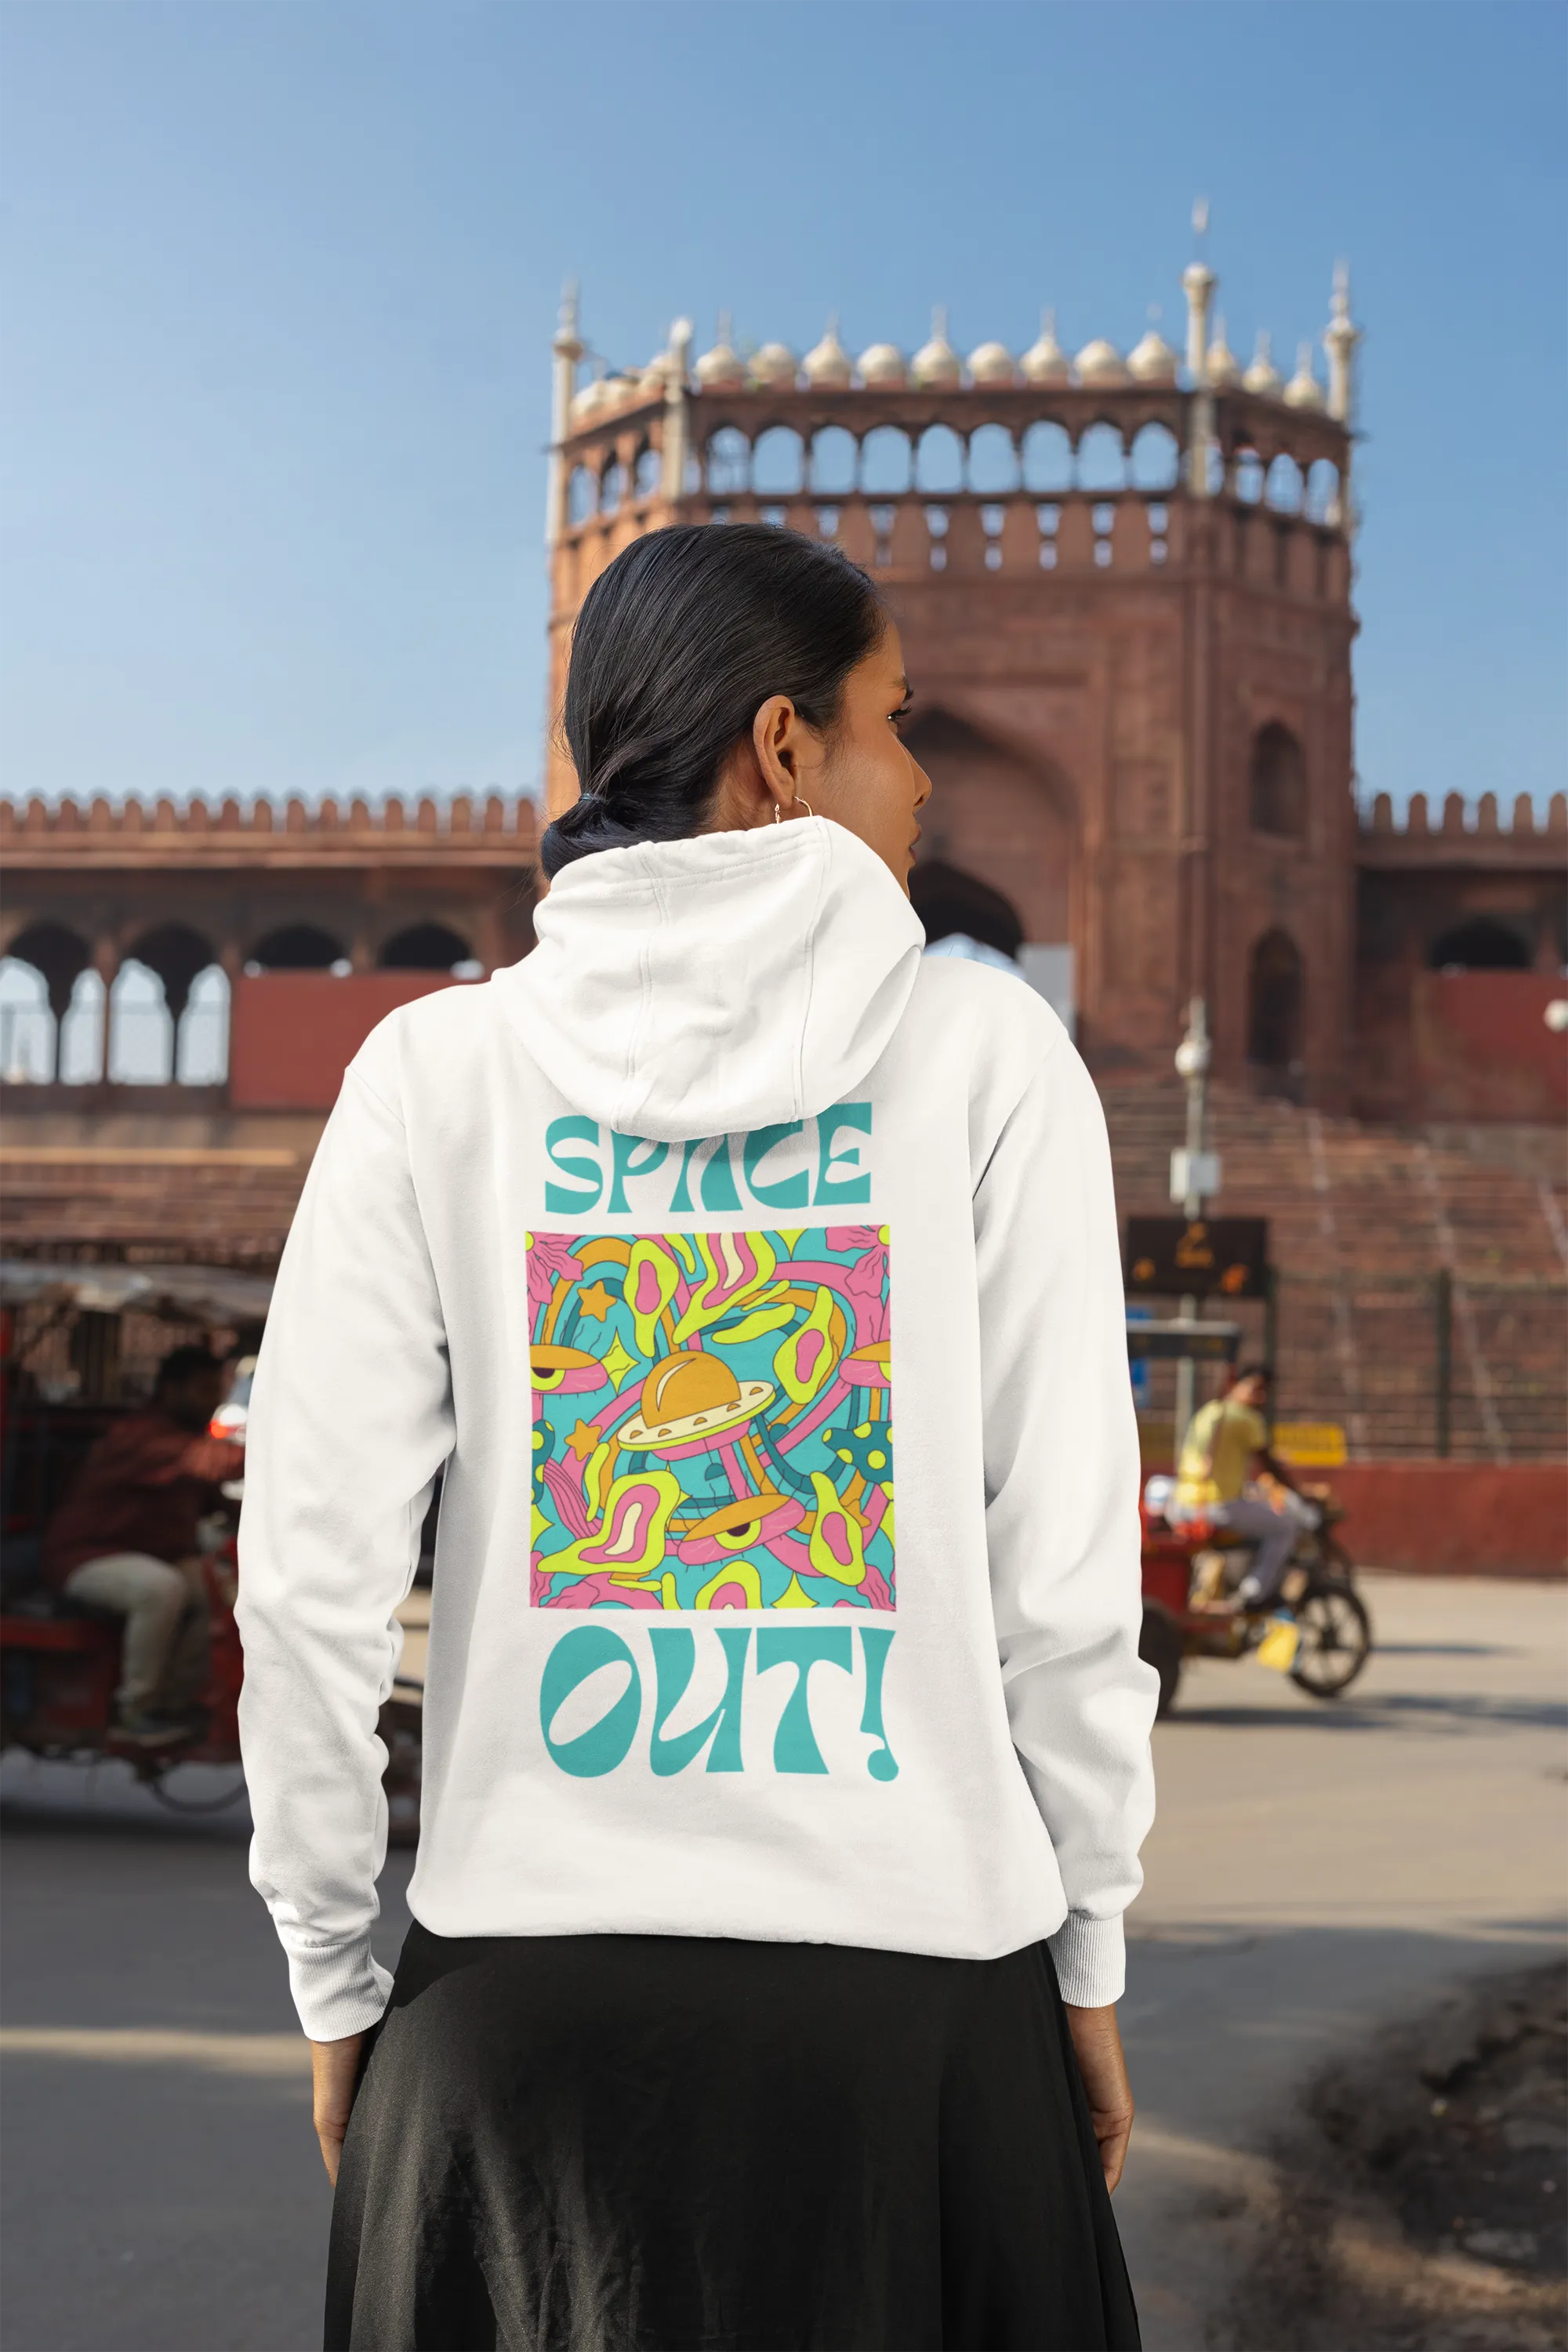 Space Out | Space Vogue |  Premium Unisex Winter Hoodie